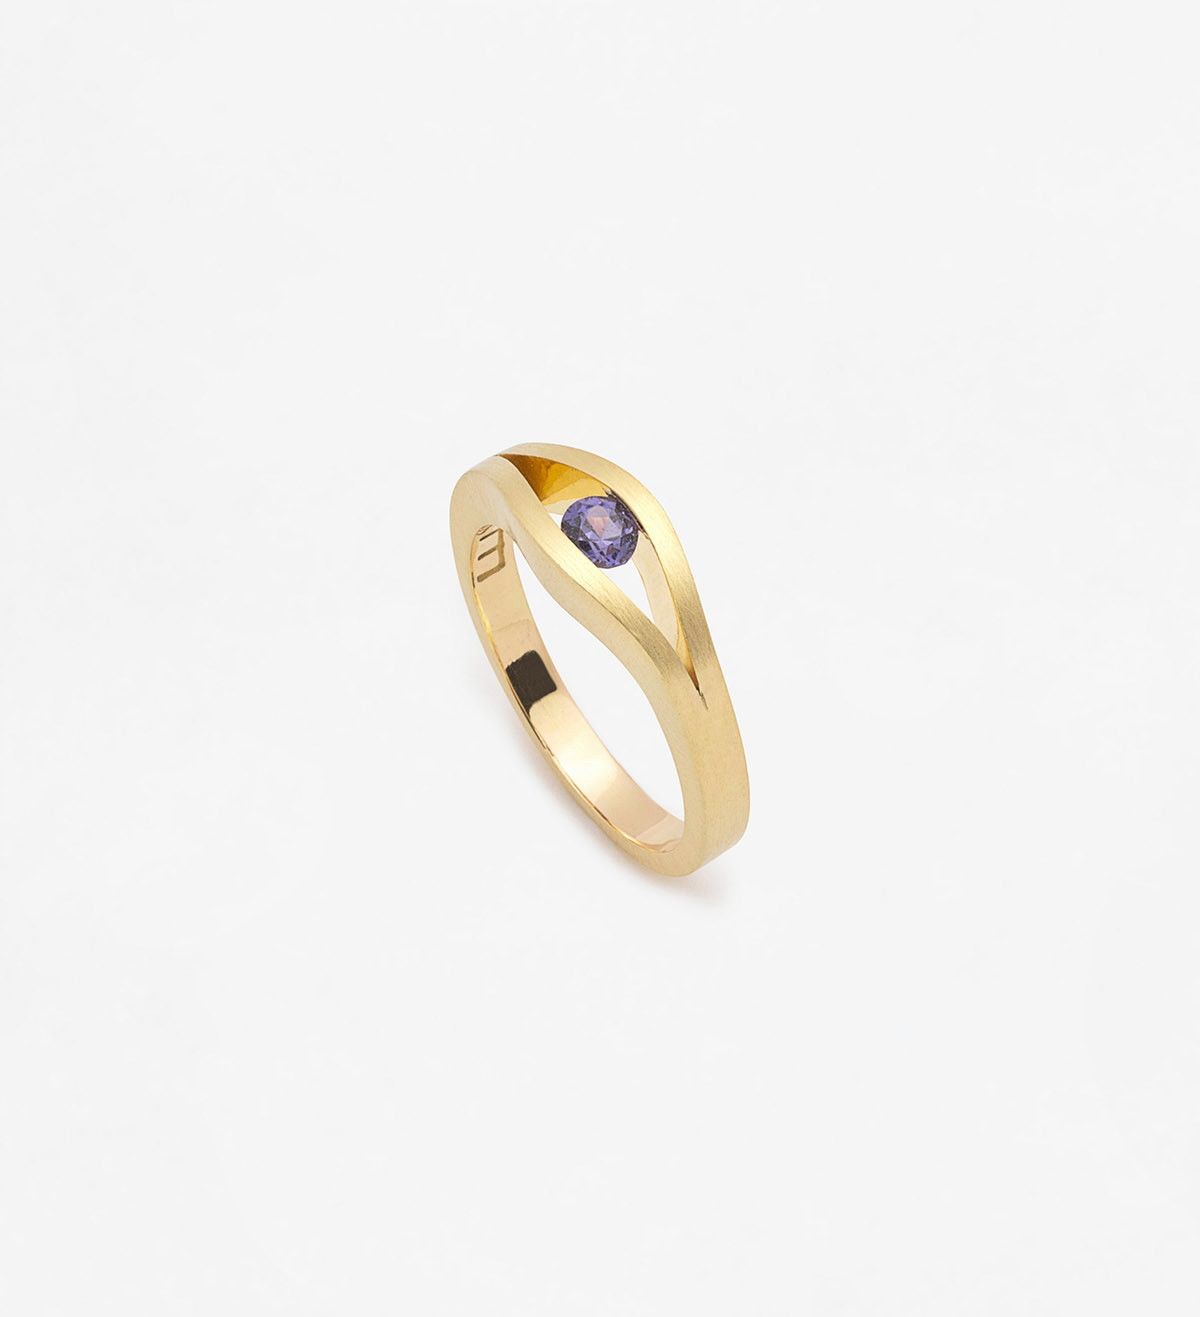 18k gold ring with lila sapphire Wennick-Lefèvre 0.21ct